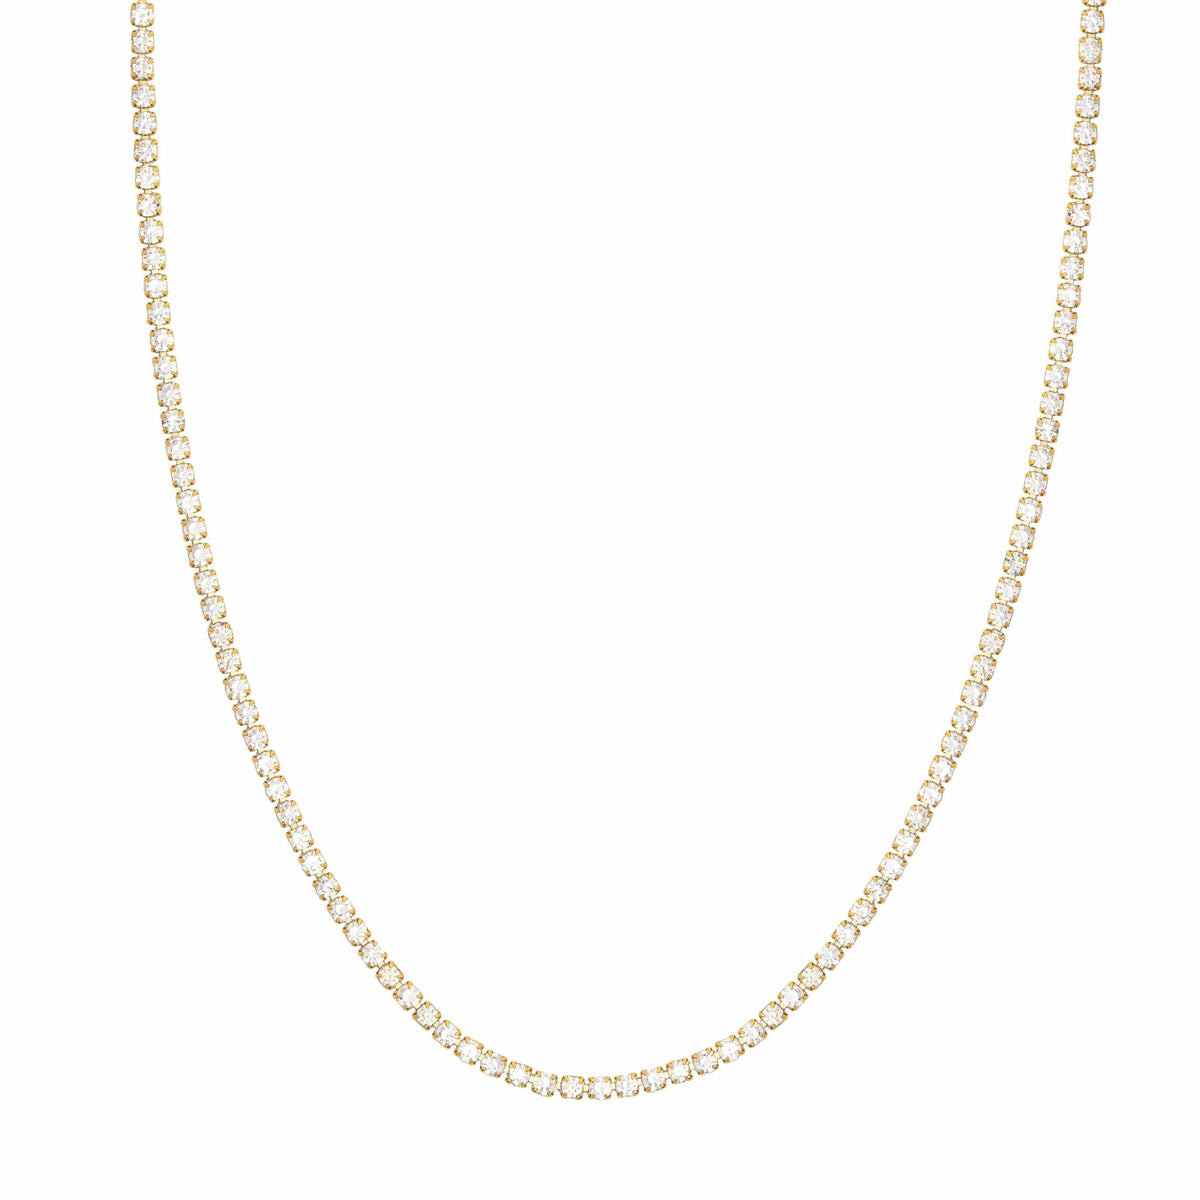 BohoMoon Stainless Steel Bardot Tennis Necklace Gold